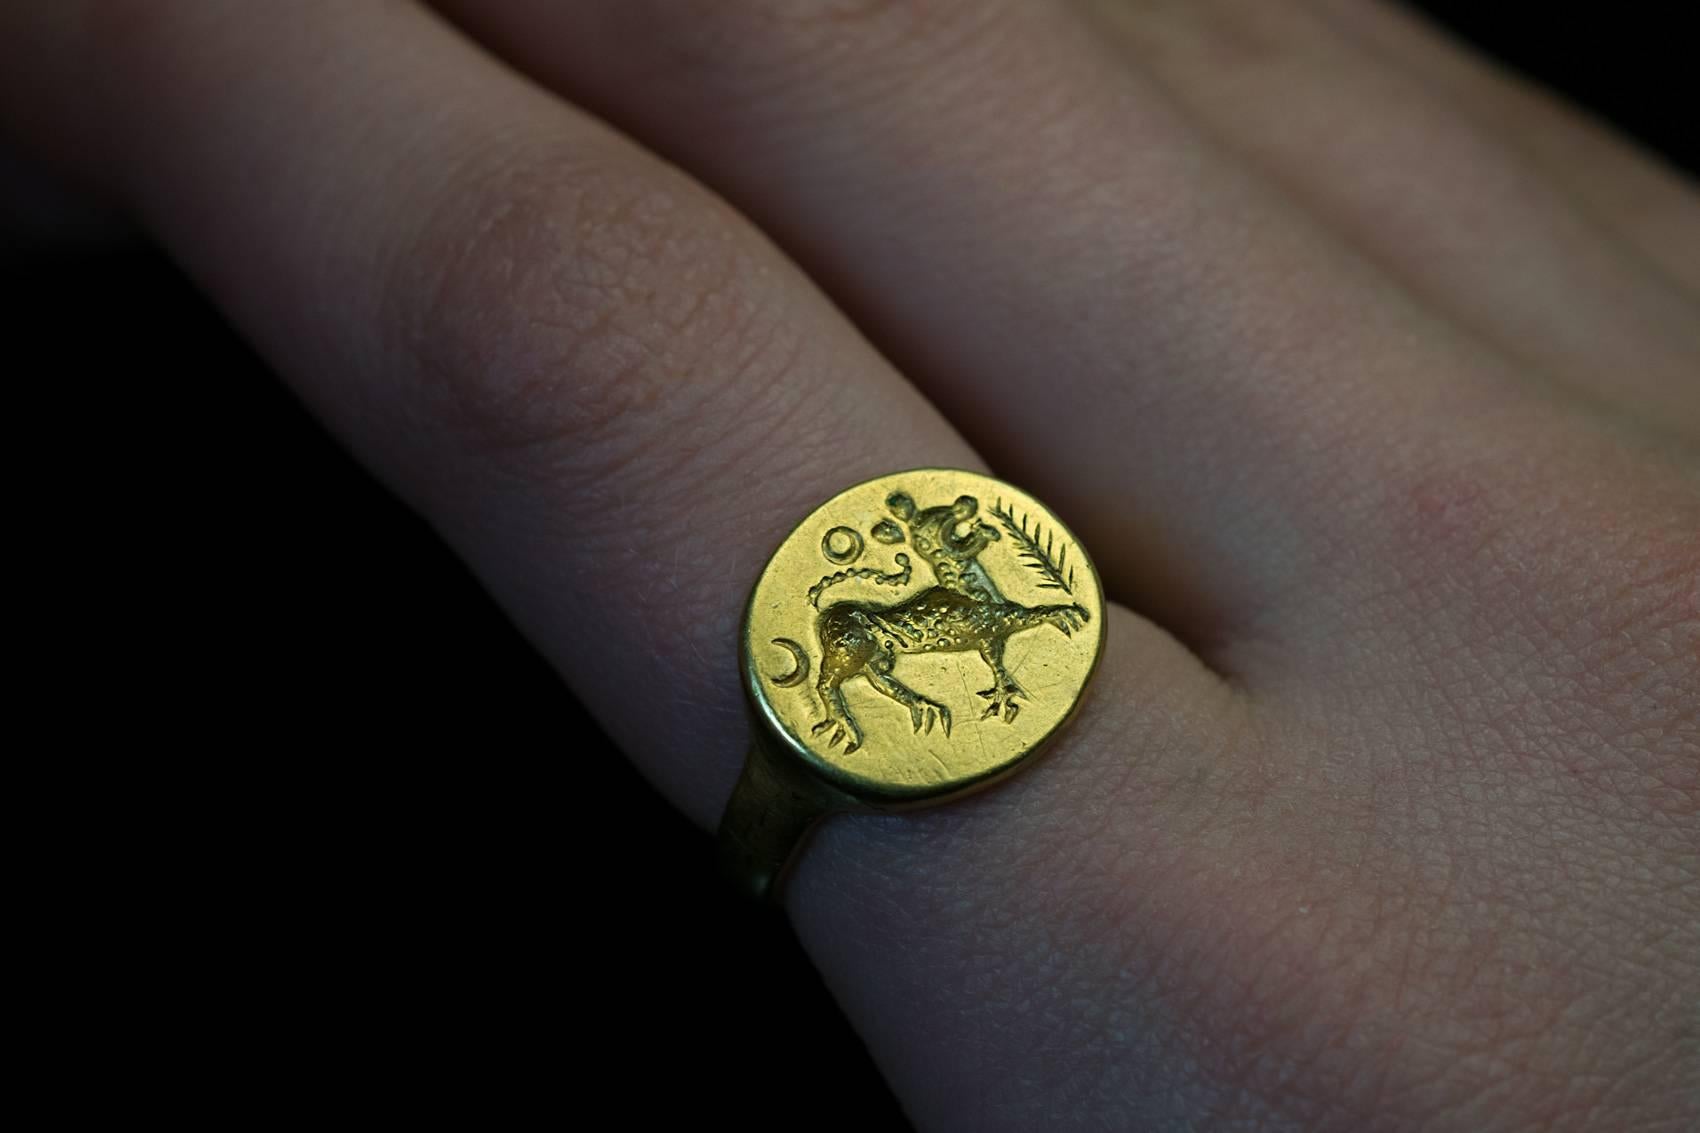 An ancient solid gold signet ring, eastern Roman Empire, circa 2nd century AD. The bezel is engraved with a leopard walking to the right, flanked by a crescent moon and a palm leaf, a sun above.

This very rare and unusual ring is perfectly